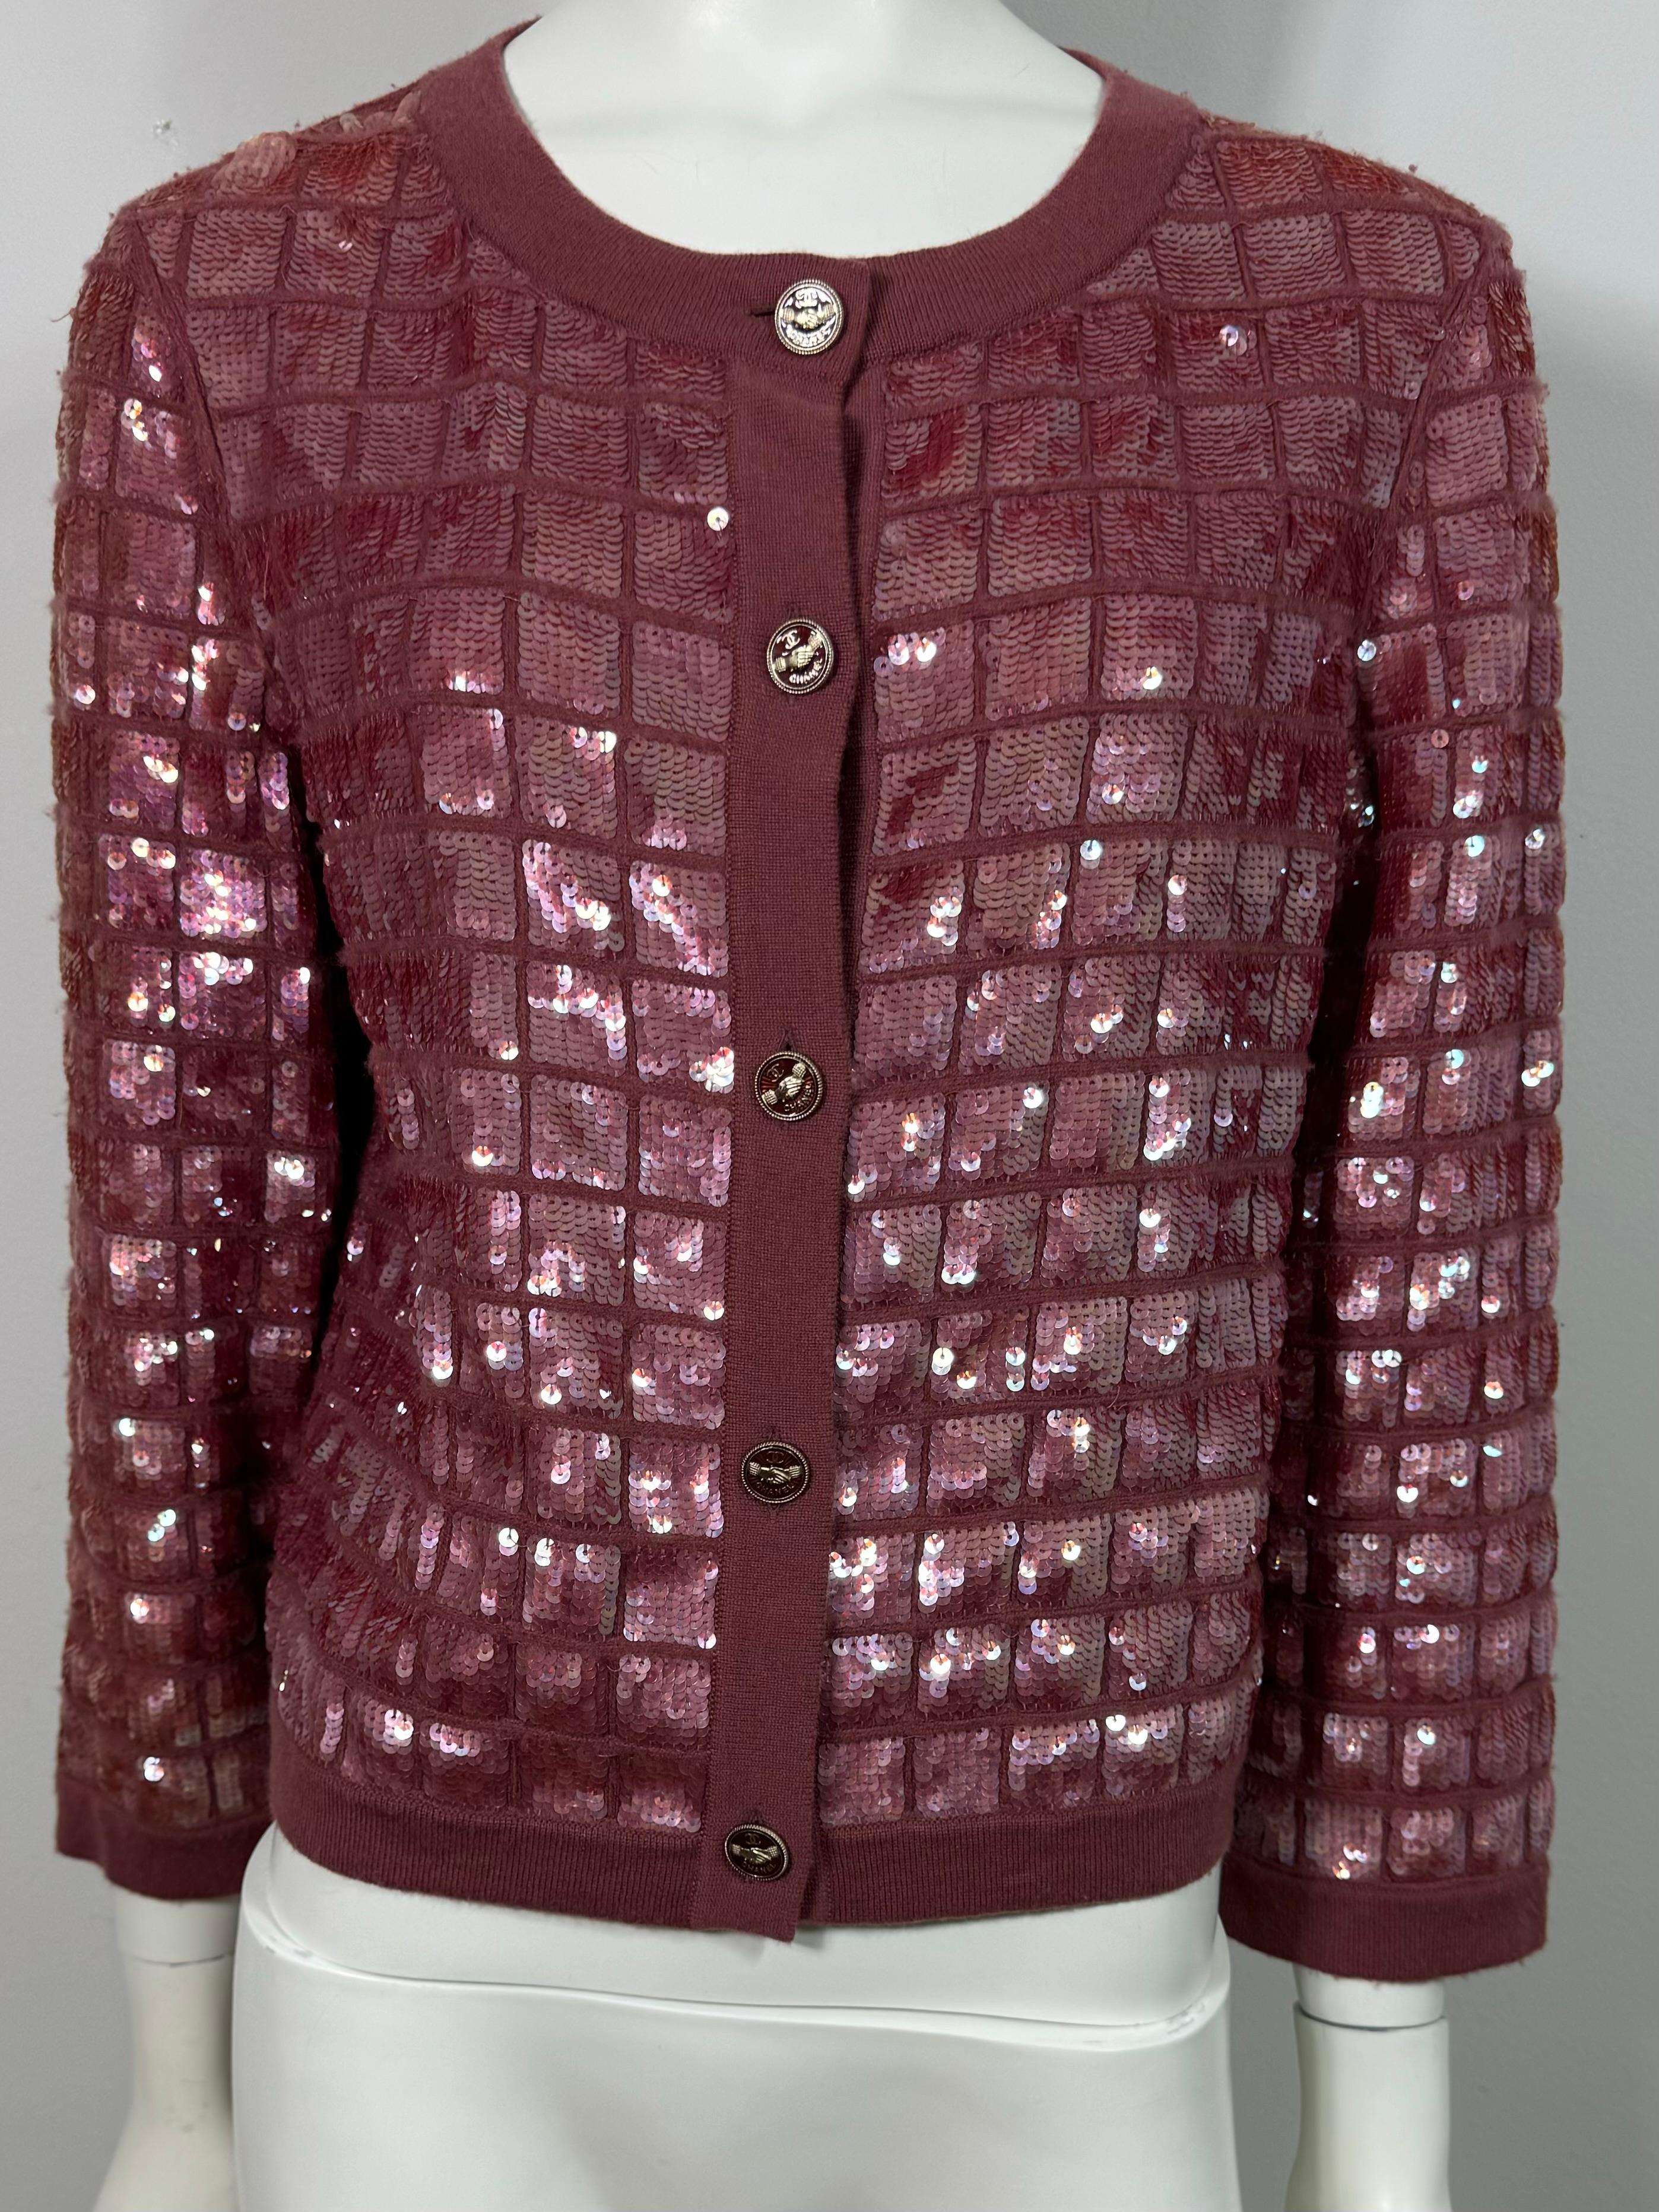 Chanel Spring 2008 Mauve Heavily Embellished Sequin Cashmere Cardigan-Size 40  This Karl Lagerfeld design from the Spring 2008 collection is a must have for any Chanel Collector. A beautiful Chanel evening cardigan in 100% cashmere features a square